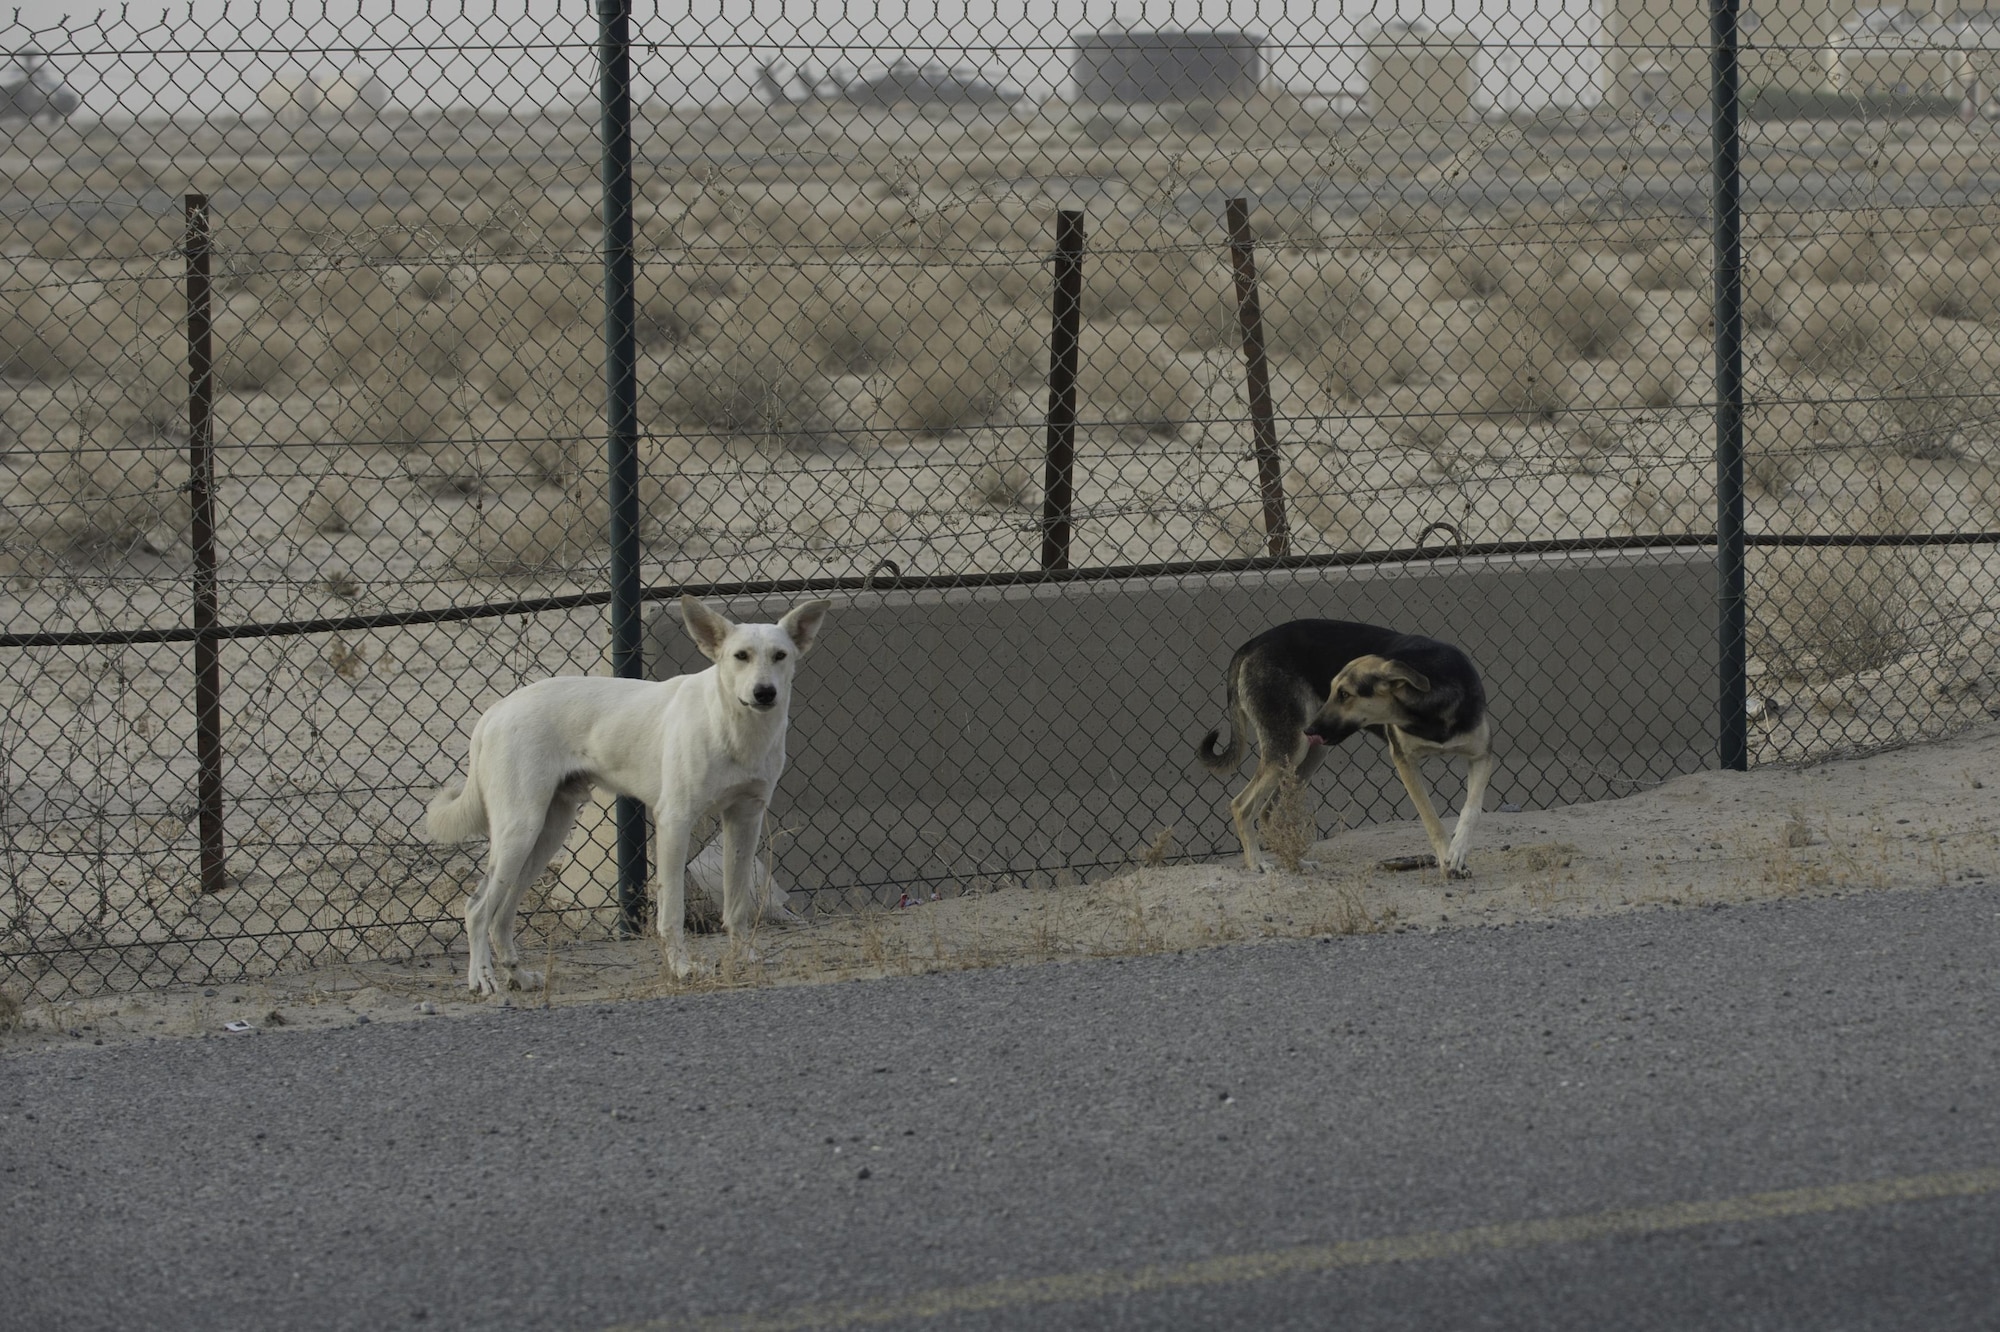 Feral dogs can be prone to fighting amongst themselves and are very protective of their young, which leaves the base populace at risk of being bitten.